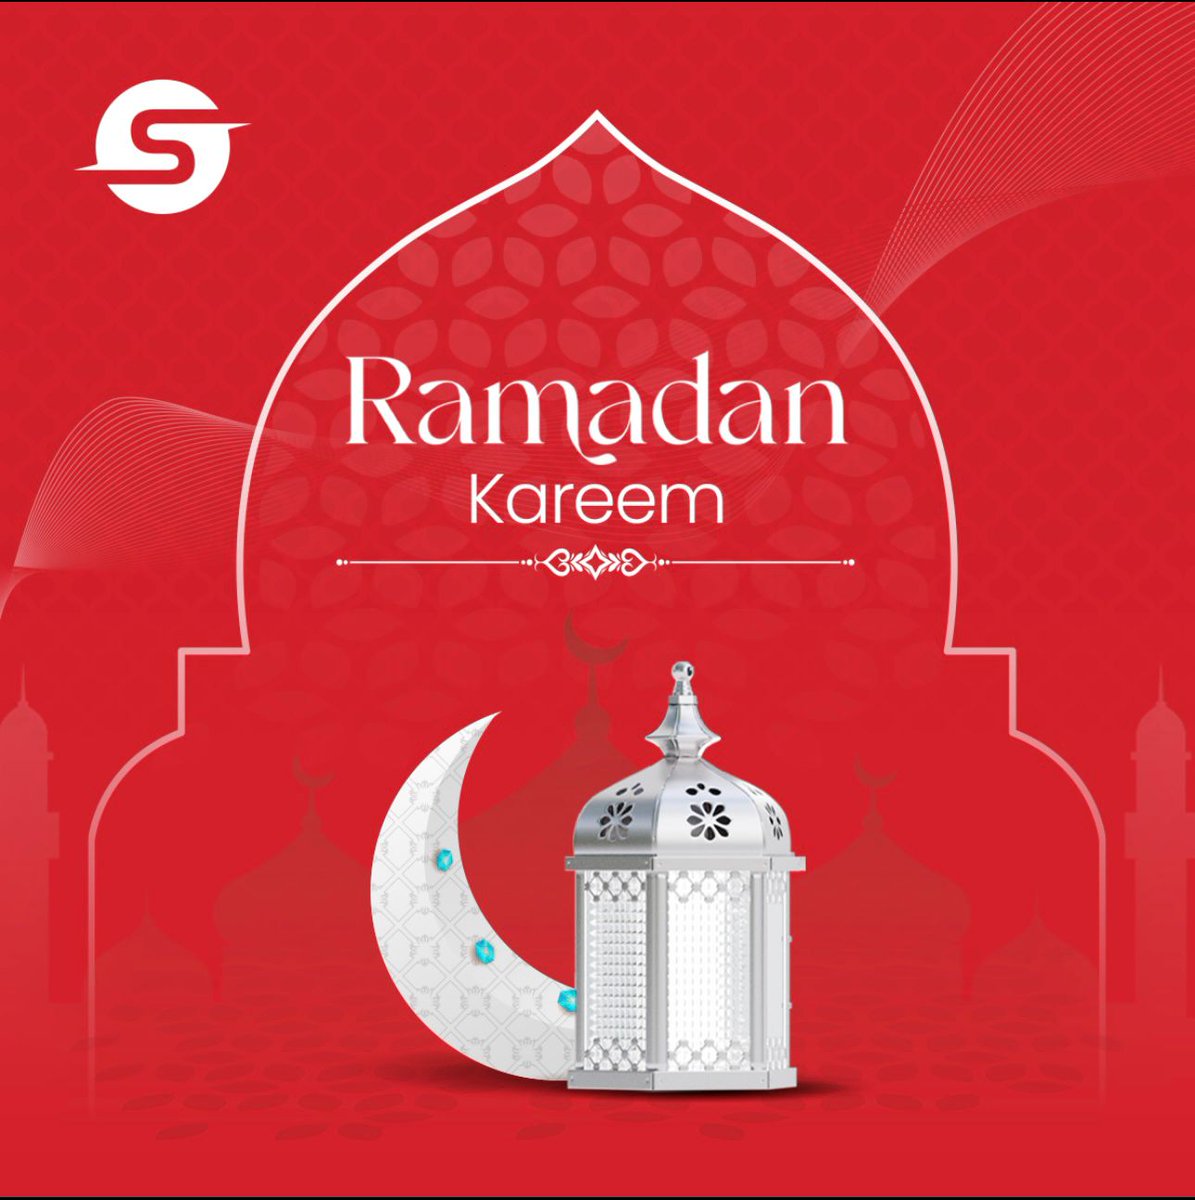 Wishing you and your loved ones a blessed Ramadan! May this holy month bring you peace, happiness, and spiritual fulfillment. Ramadan Mubarak! 🌙✨ #Ramadan #RamadanMubarak #Blessings